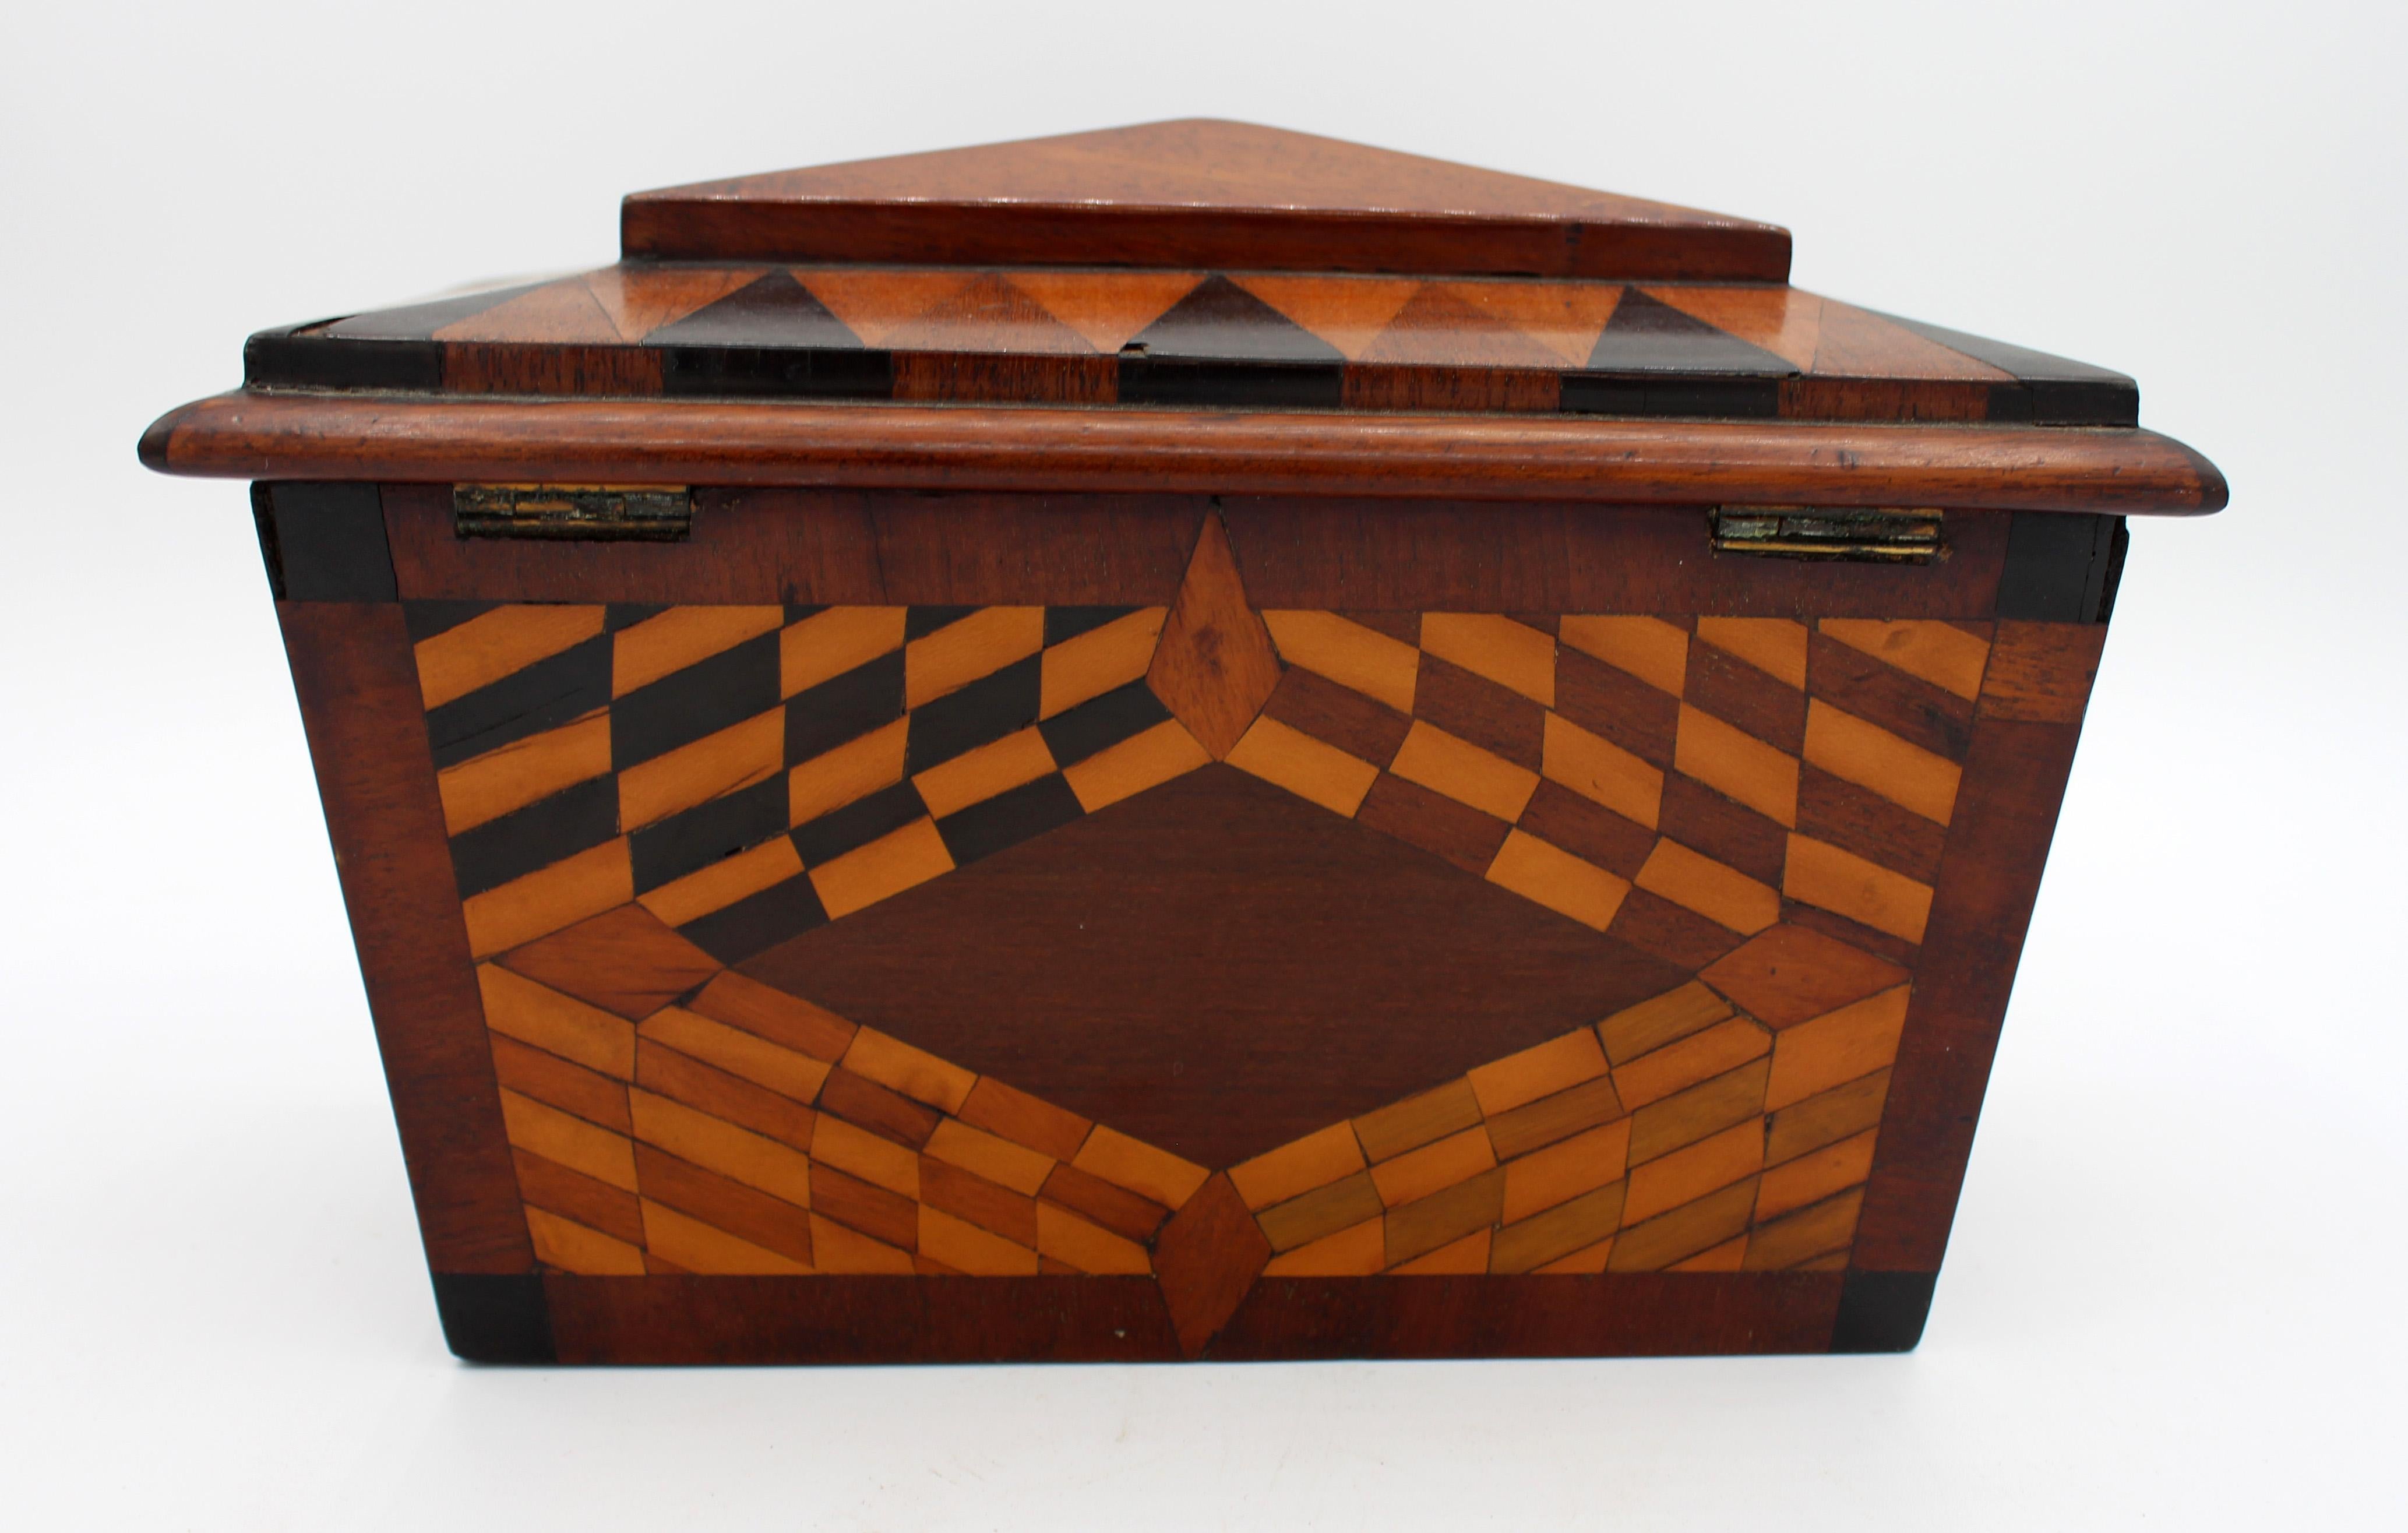 Mid-19th century parquetry inlaid tea caddy box. English. Extensive parquetry work mahogany, ebony, satinwood & dyed sycamore to each side and in the interior of the lid. Tea covers intact with ebony turned pulls. Minor veneer losses.
Measures: 8